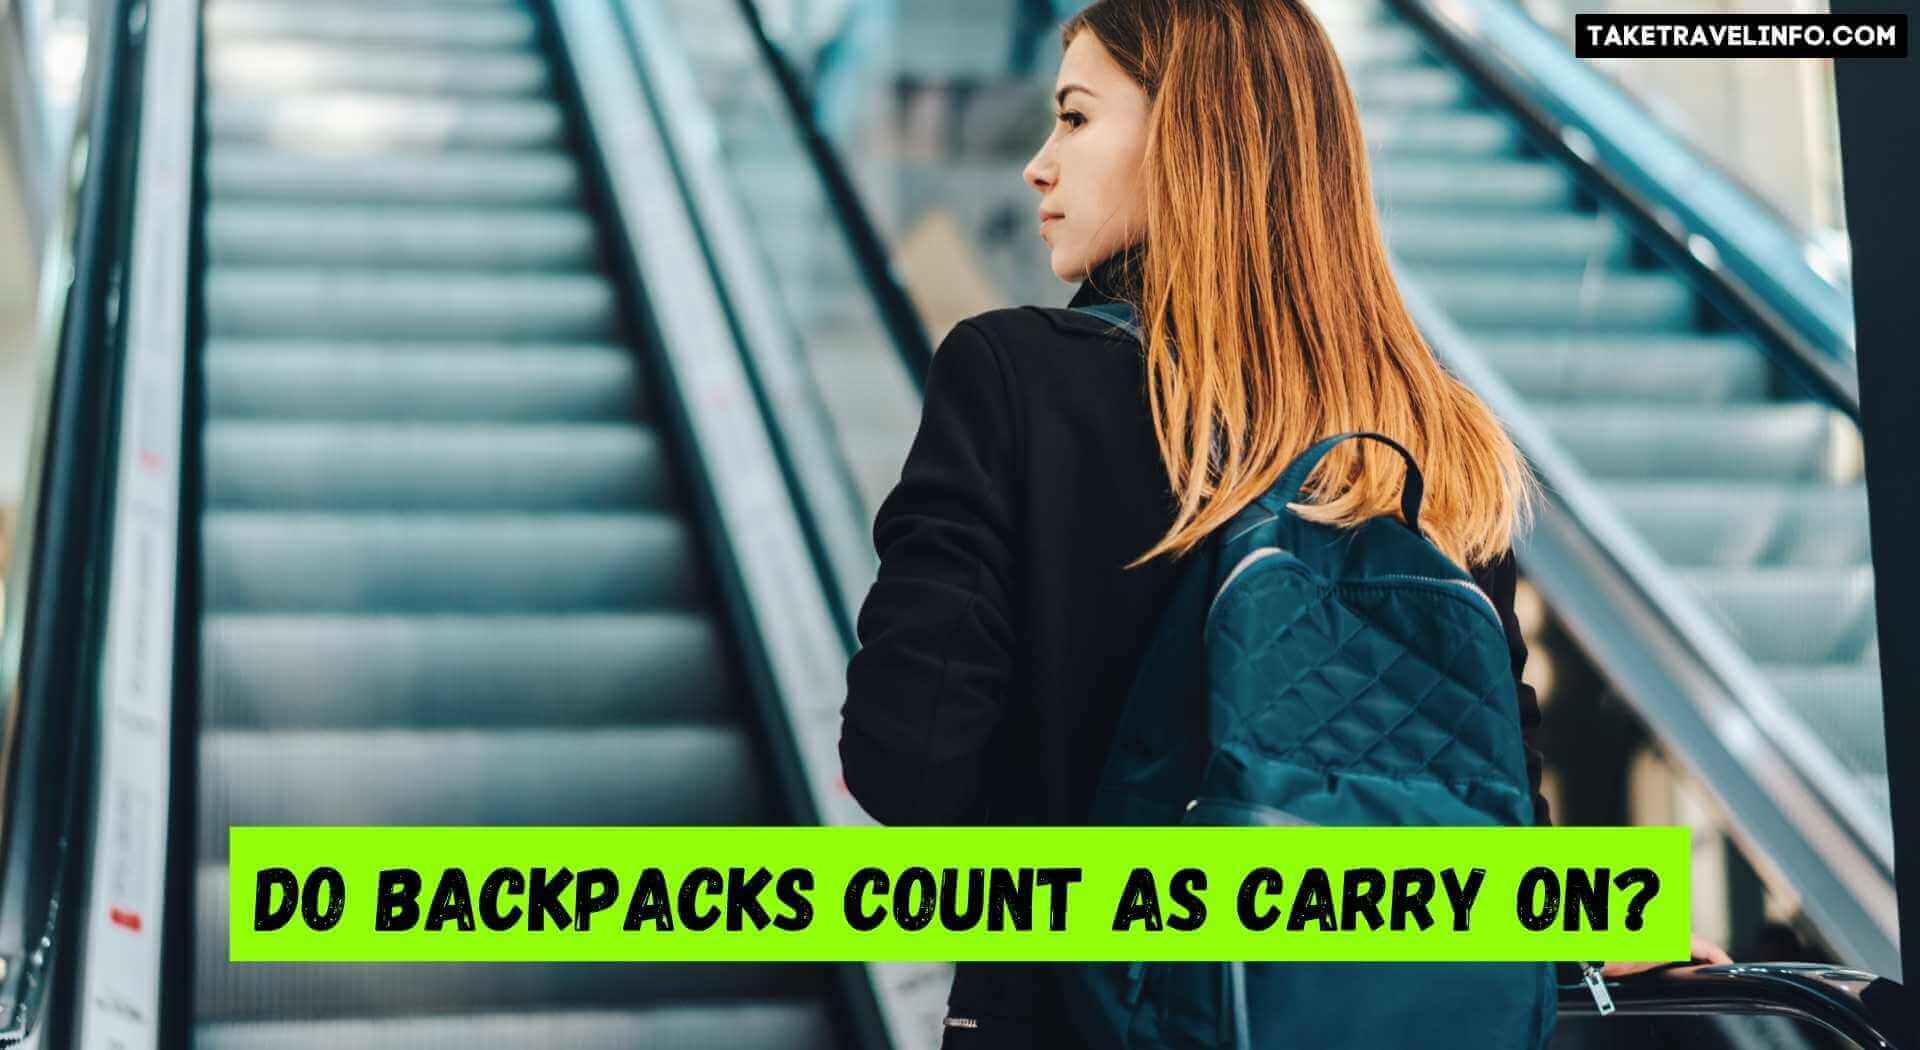 Do Backpacks Count As Carry on?